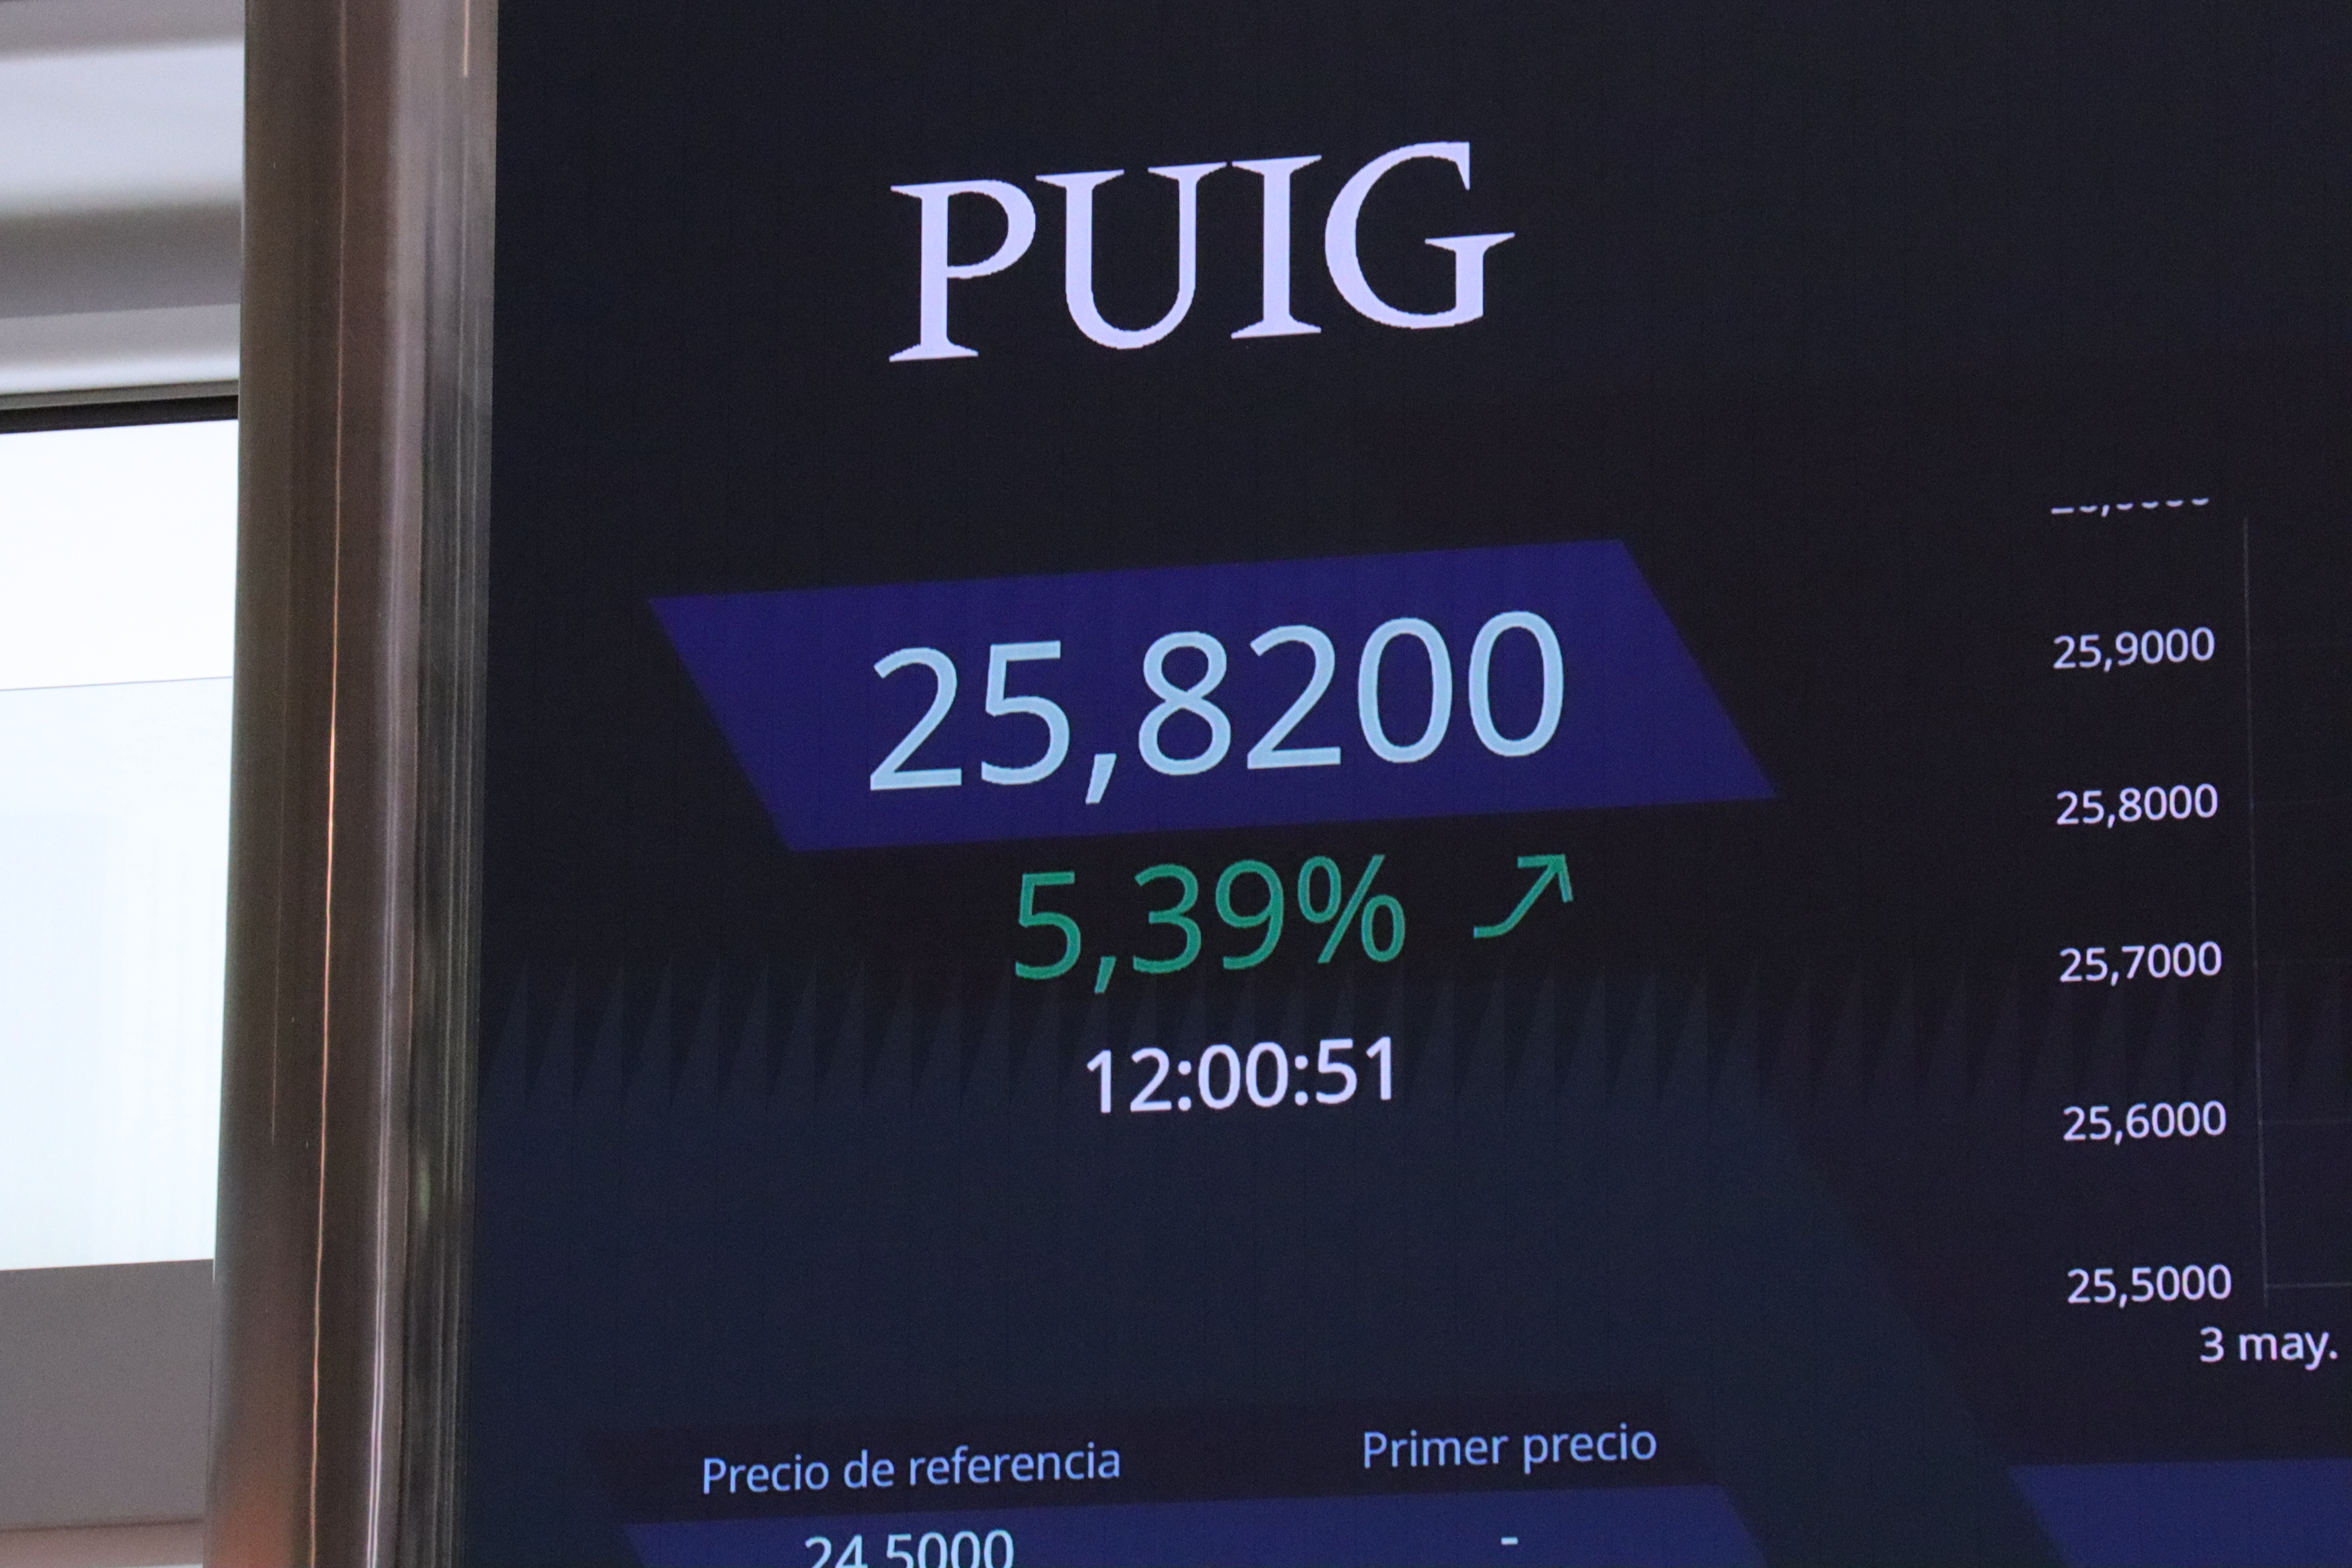 Puig's shares short after going public